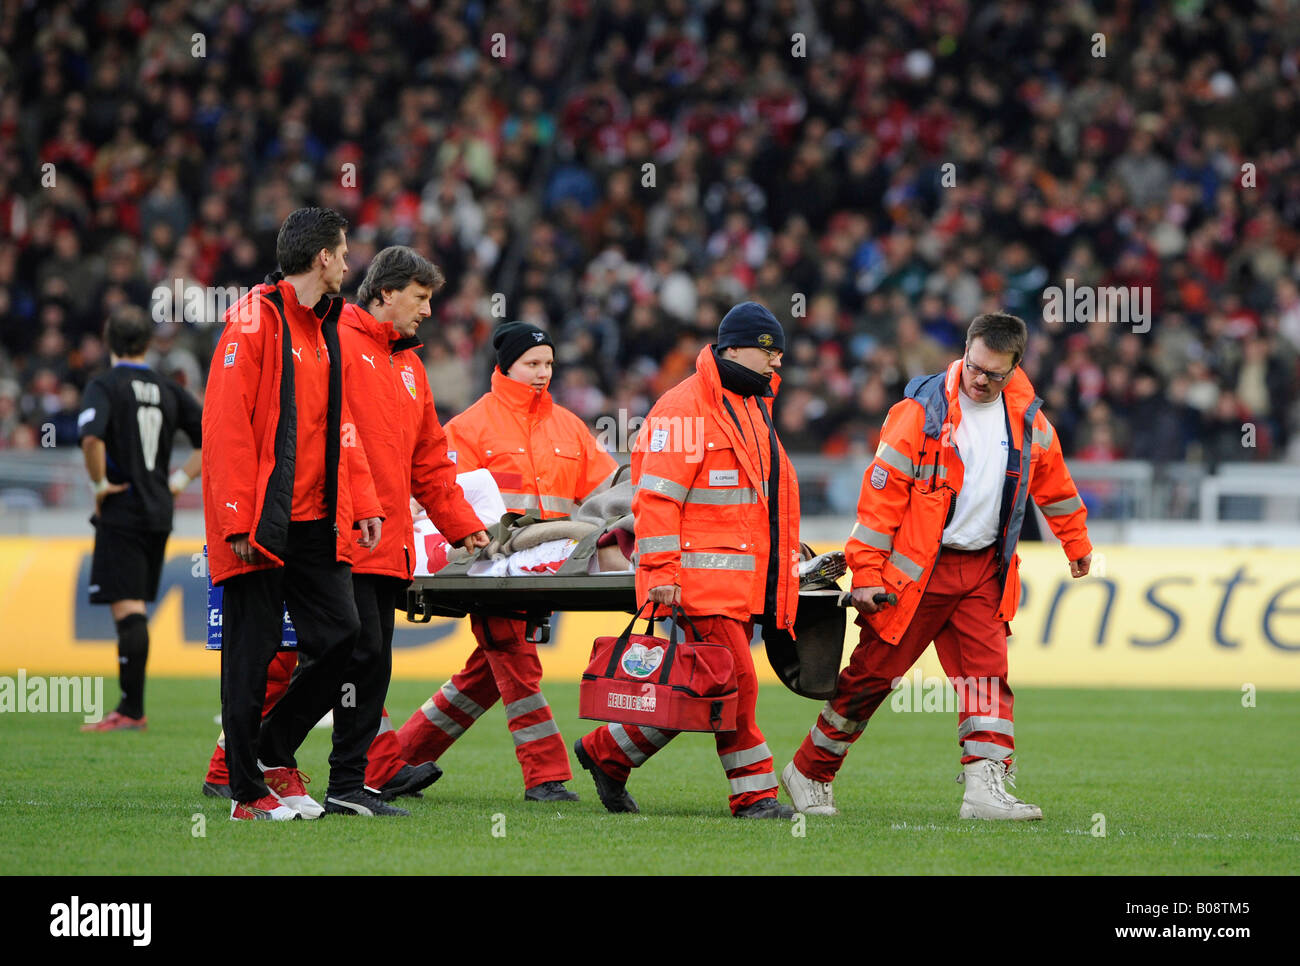 Paramedics carrying an injured football player on a stretcher Stock Photo